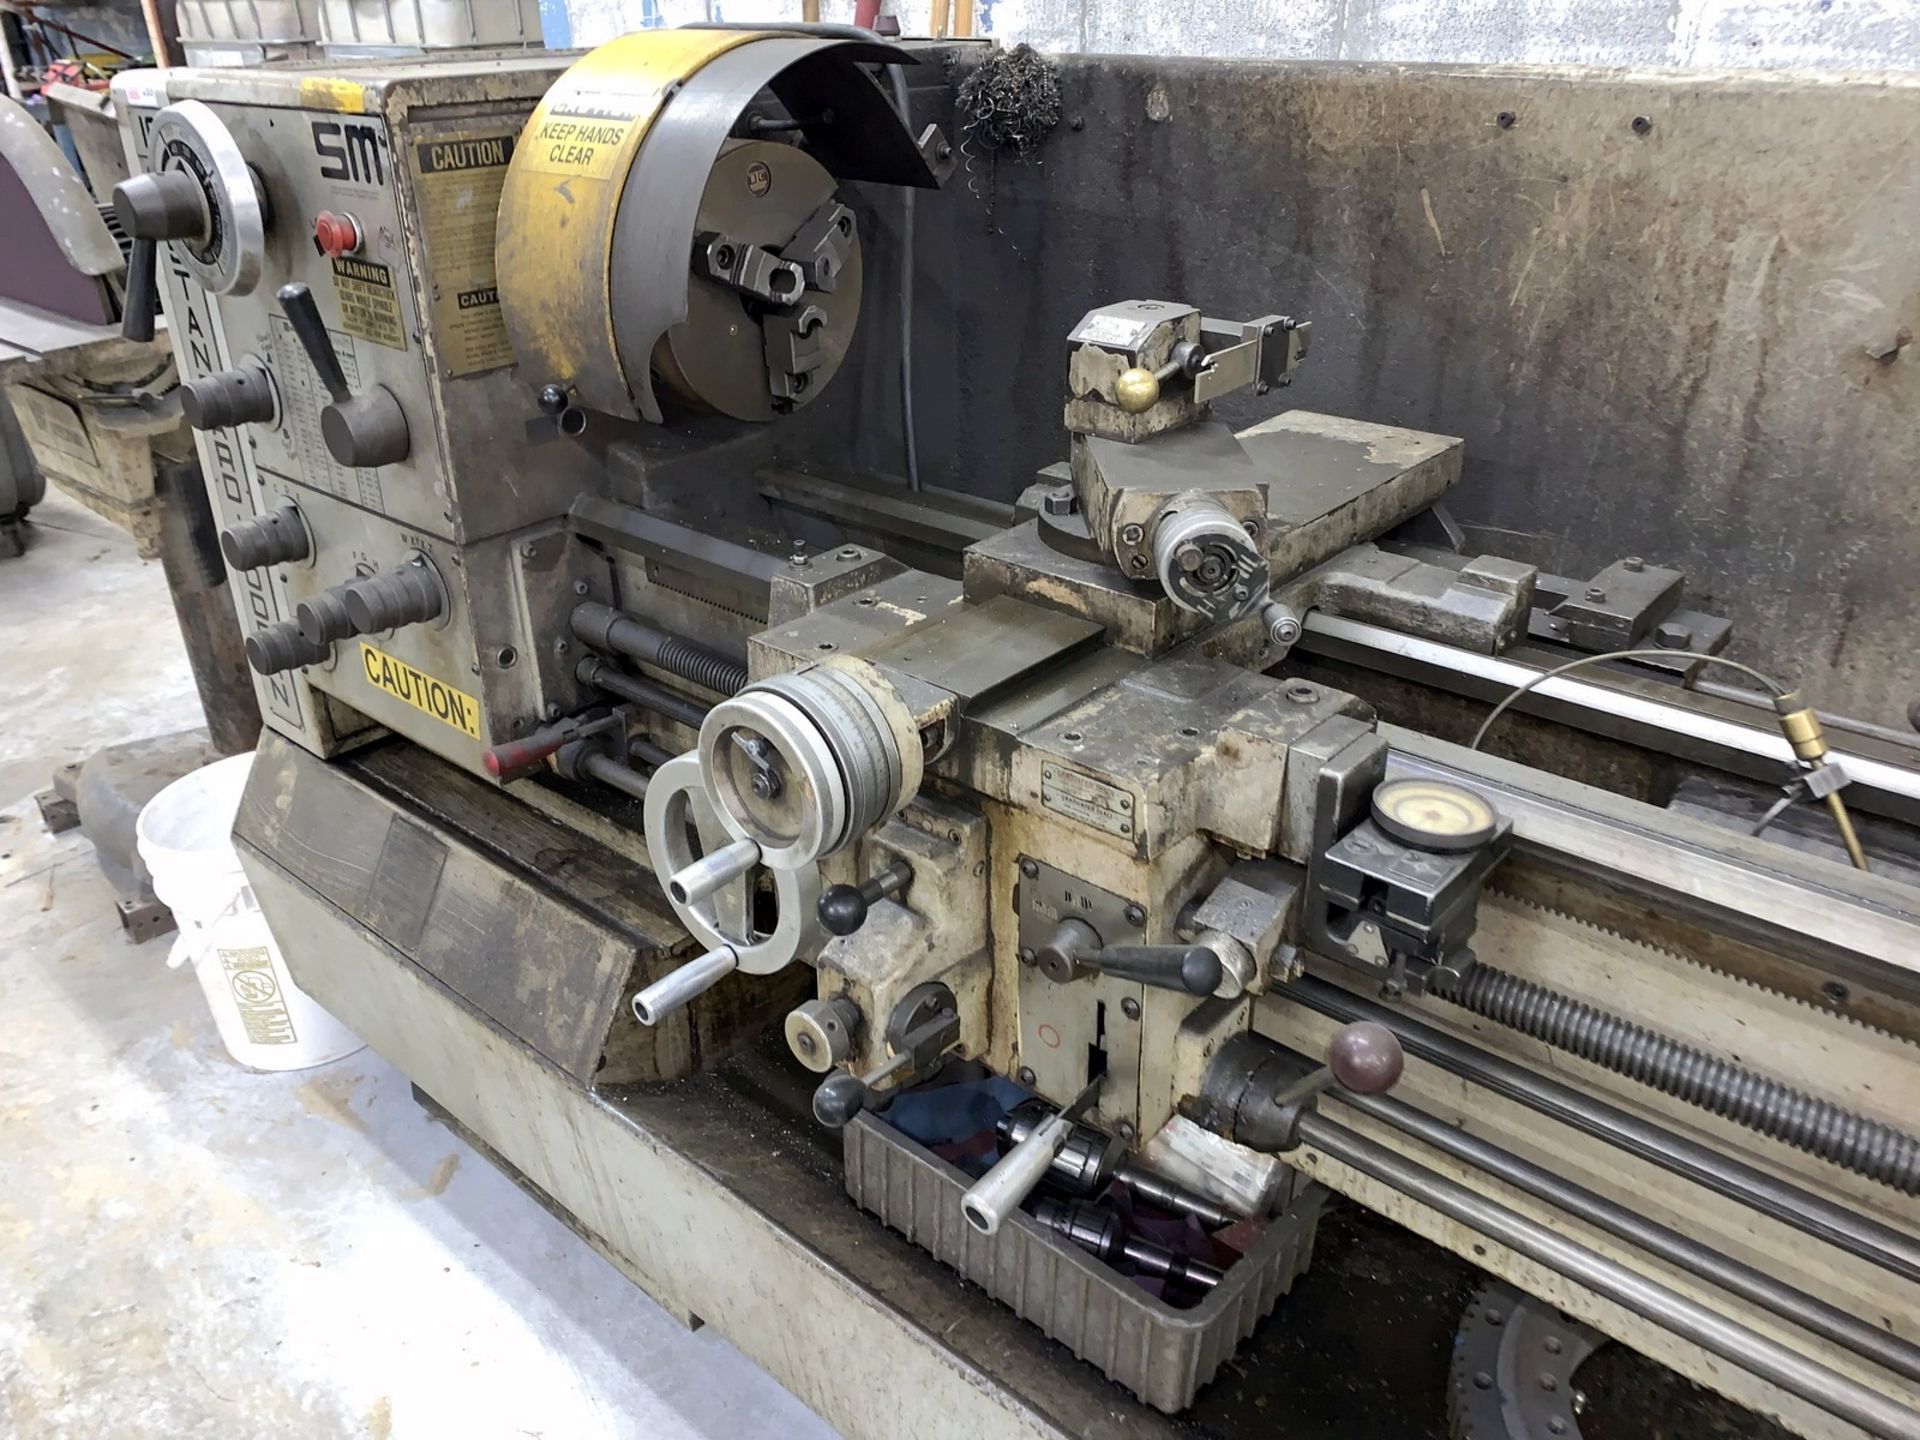 Standard Modern Lathe, 16"Diameter Swing, 60" Between Centers, Inch and Metric Threading, 40 to 2000 - Image 4 of 6